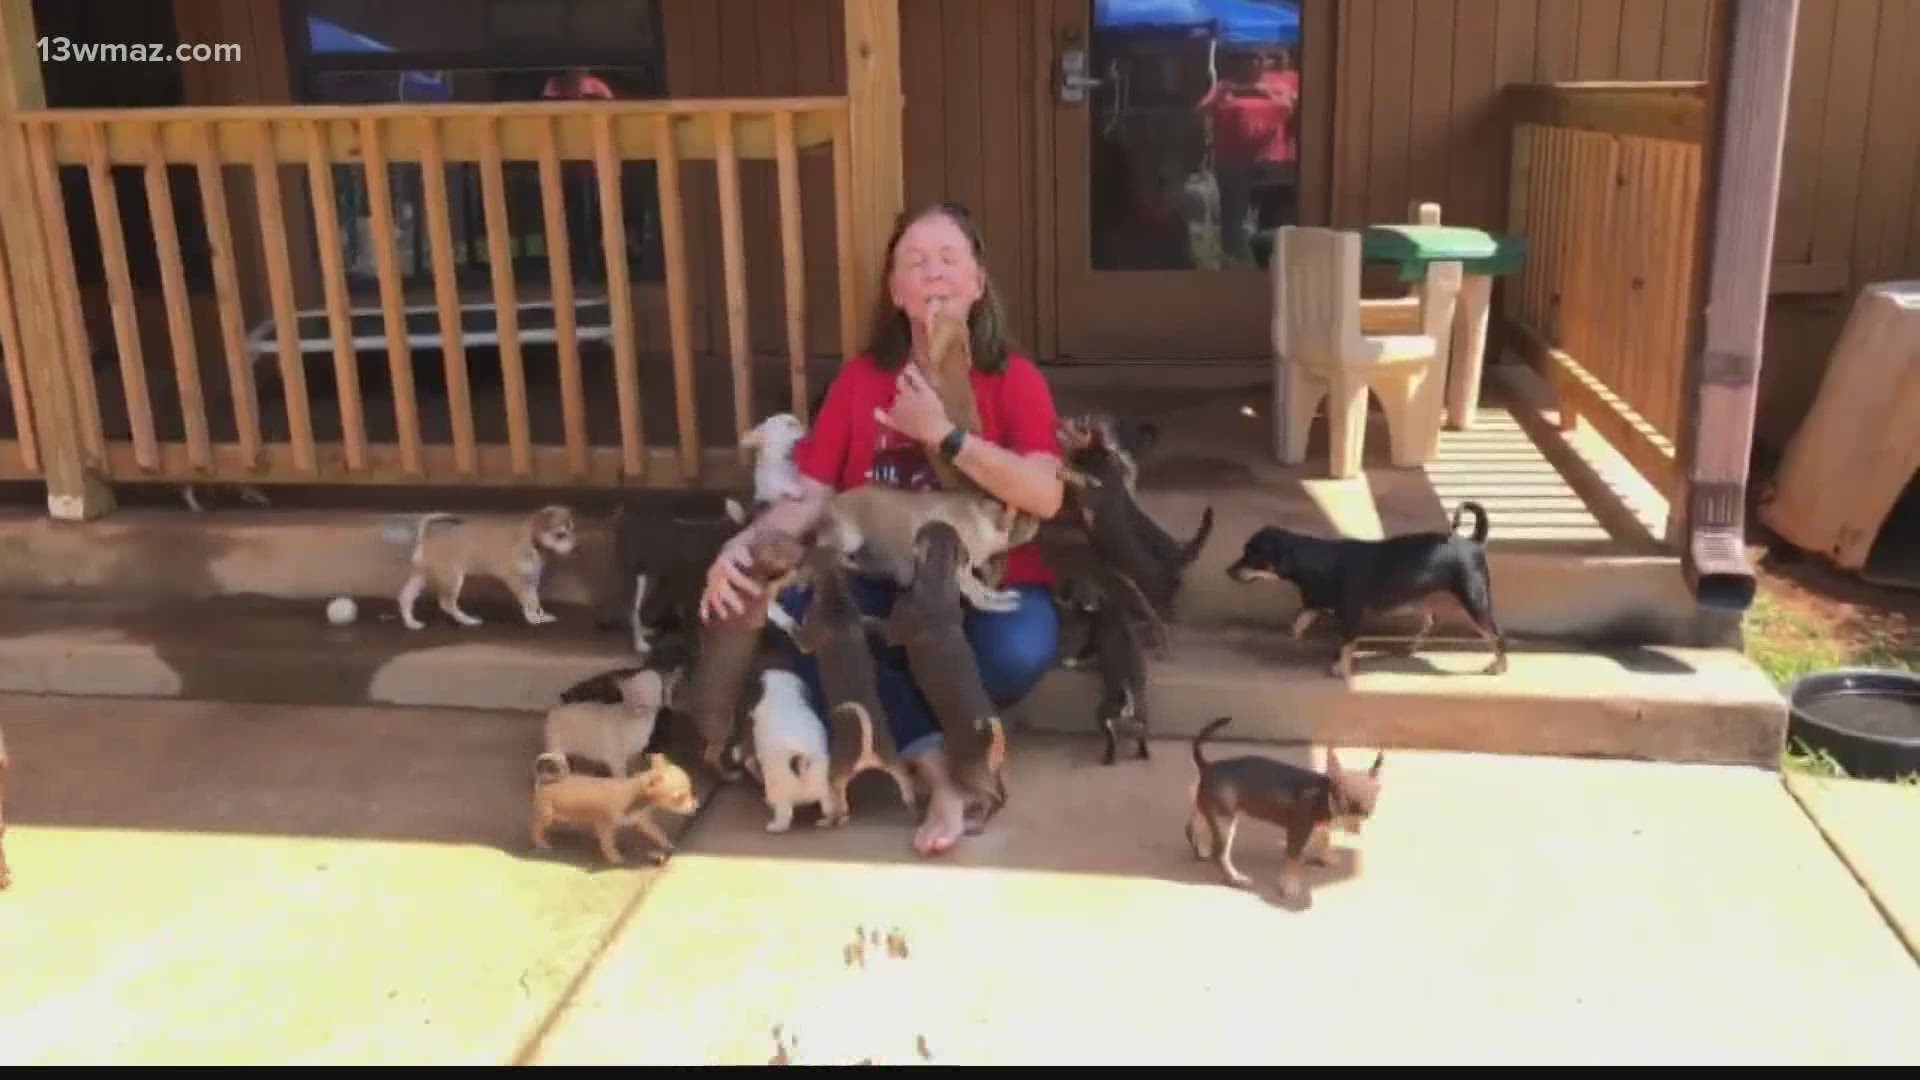 Almost 200 Chihuahuas up for adoption at Noah's Ark sanctuary 